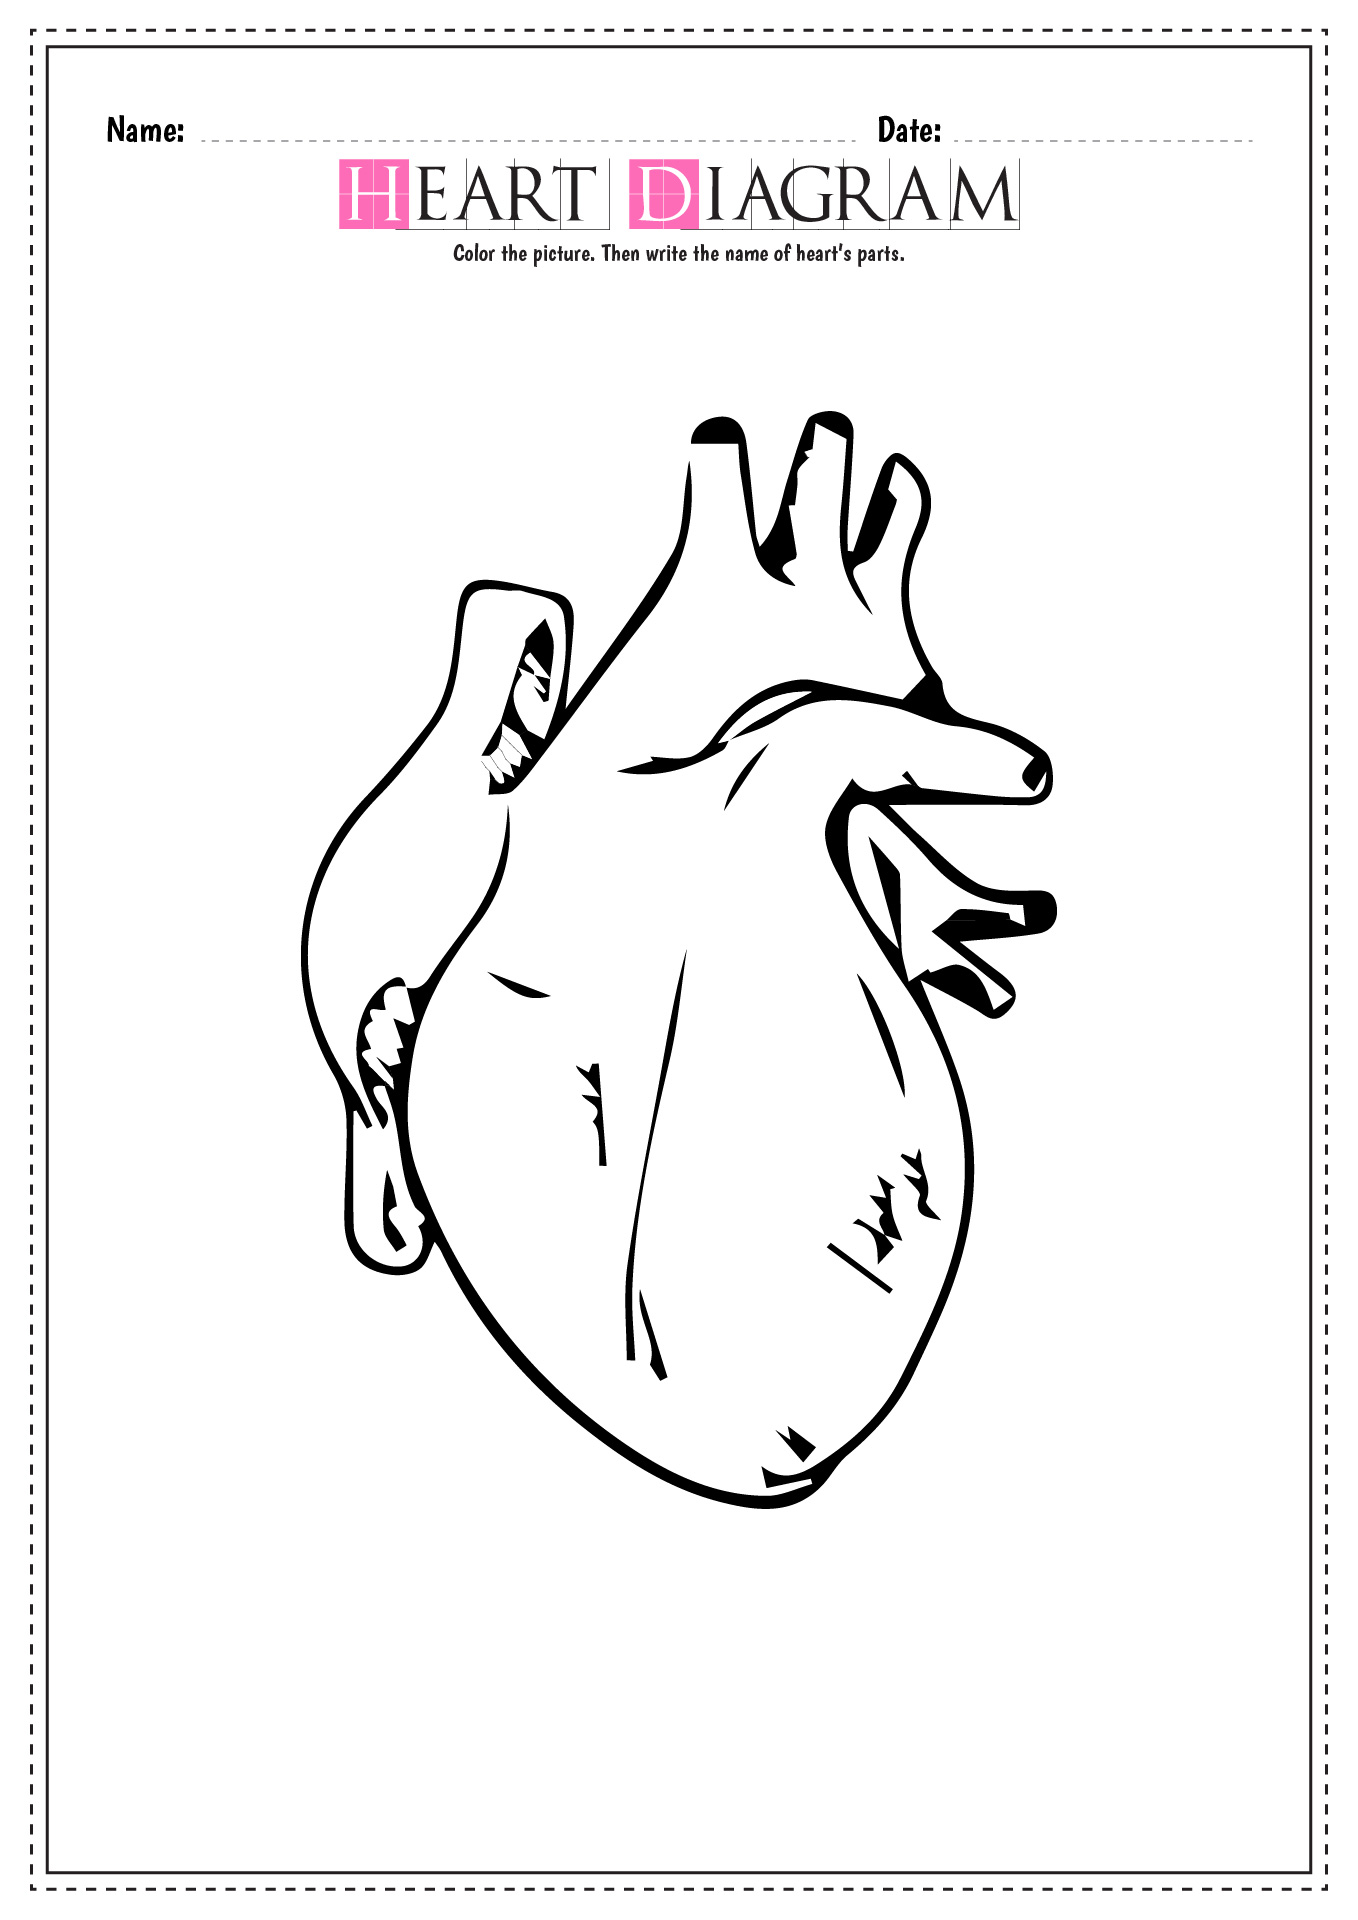 11 Best Images of Blank Heart Diagram Worksheet With Word ...